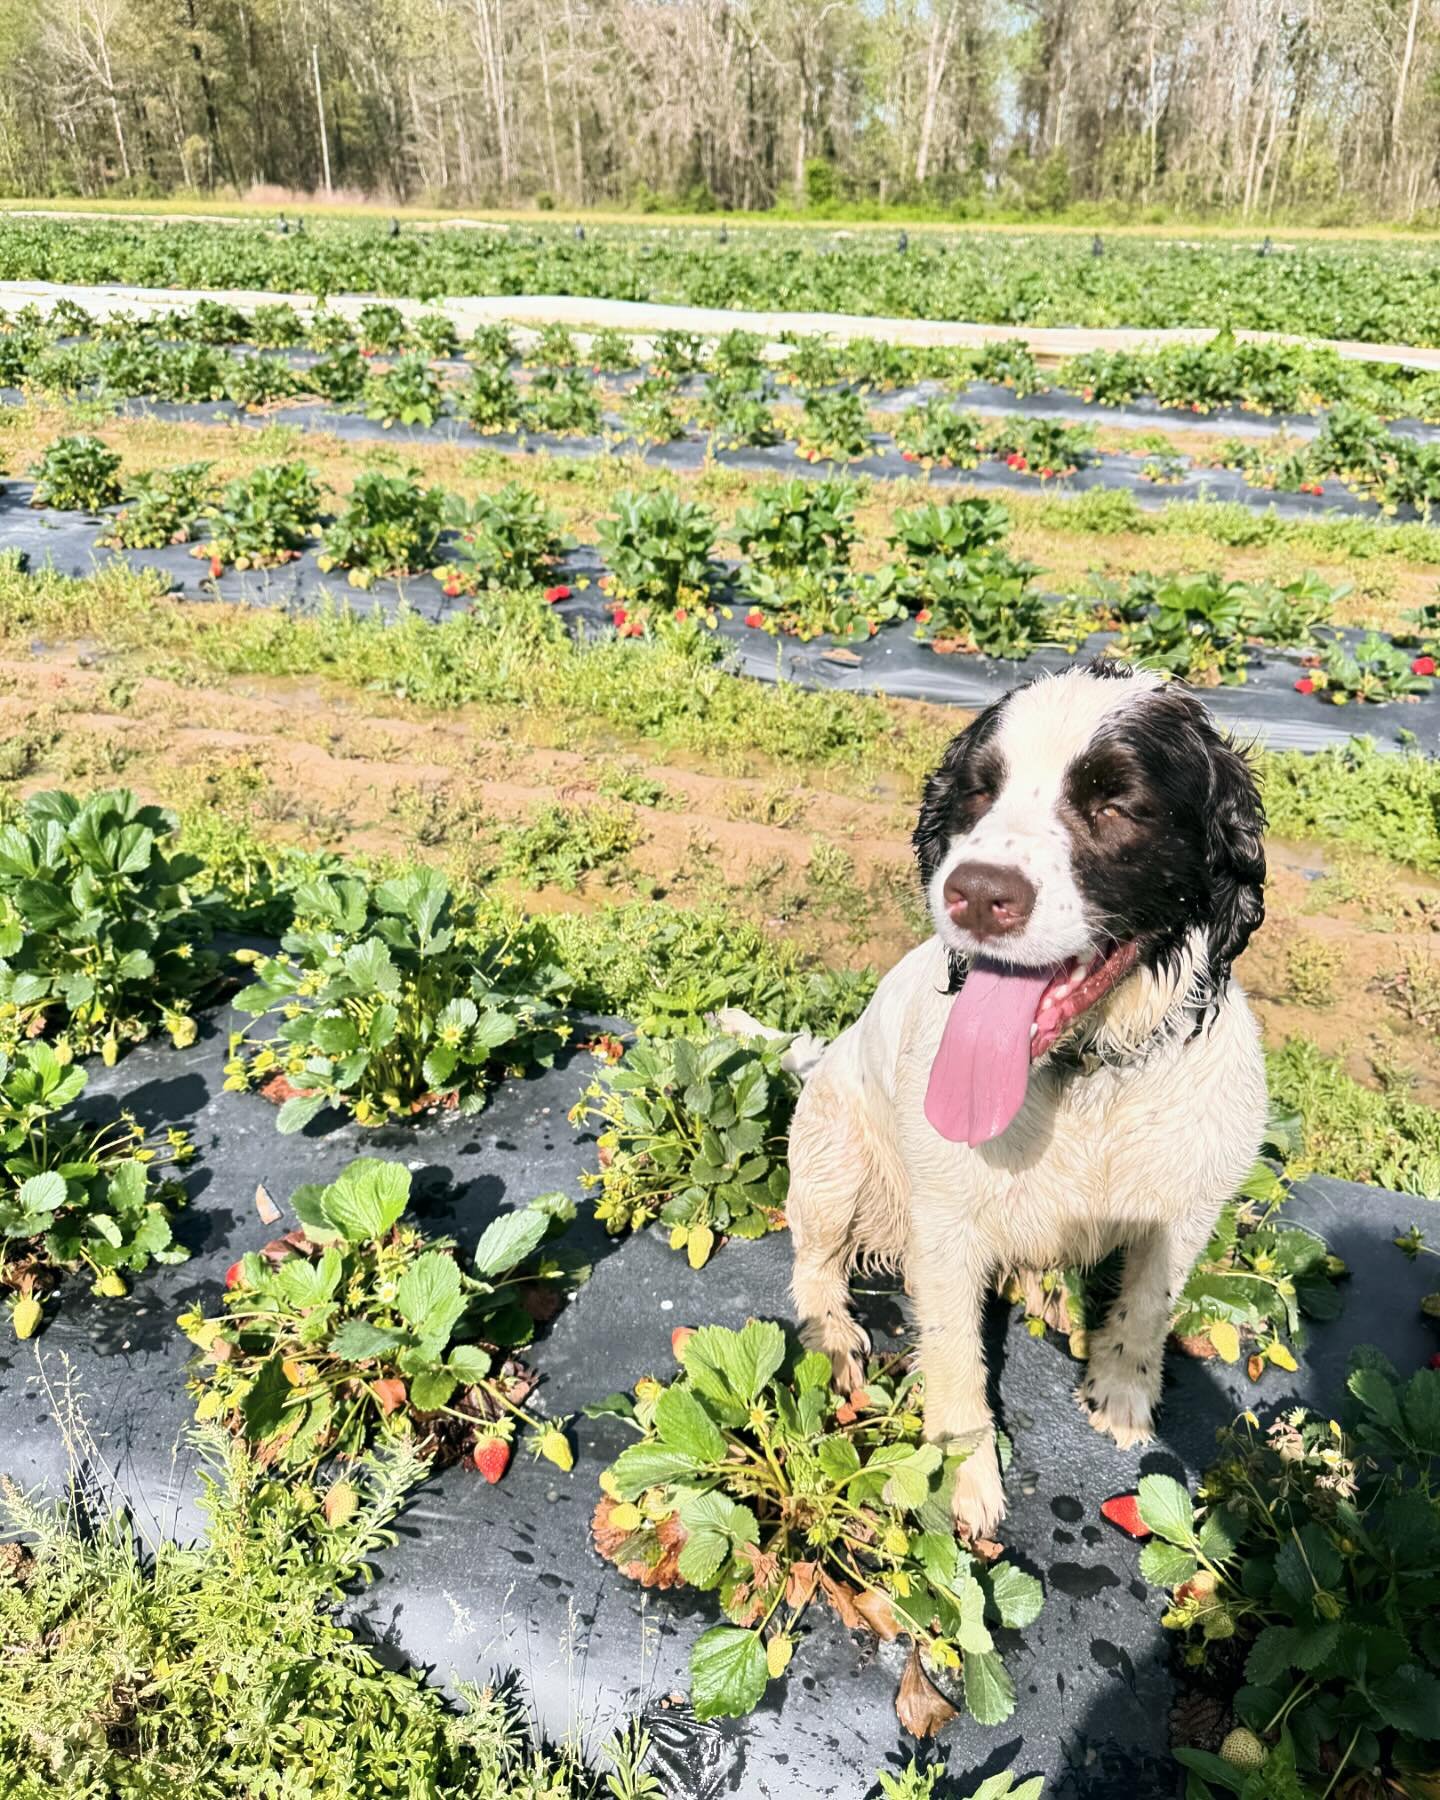 4/12 Strawberry update- Berries are ripening nicely and we will have a few at all of our locations this weekend! We are planning to open our fields to pick your own next weekend, maybe sooner&hellip;. Stay tuned! 🍓🍓🍓